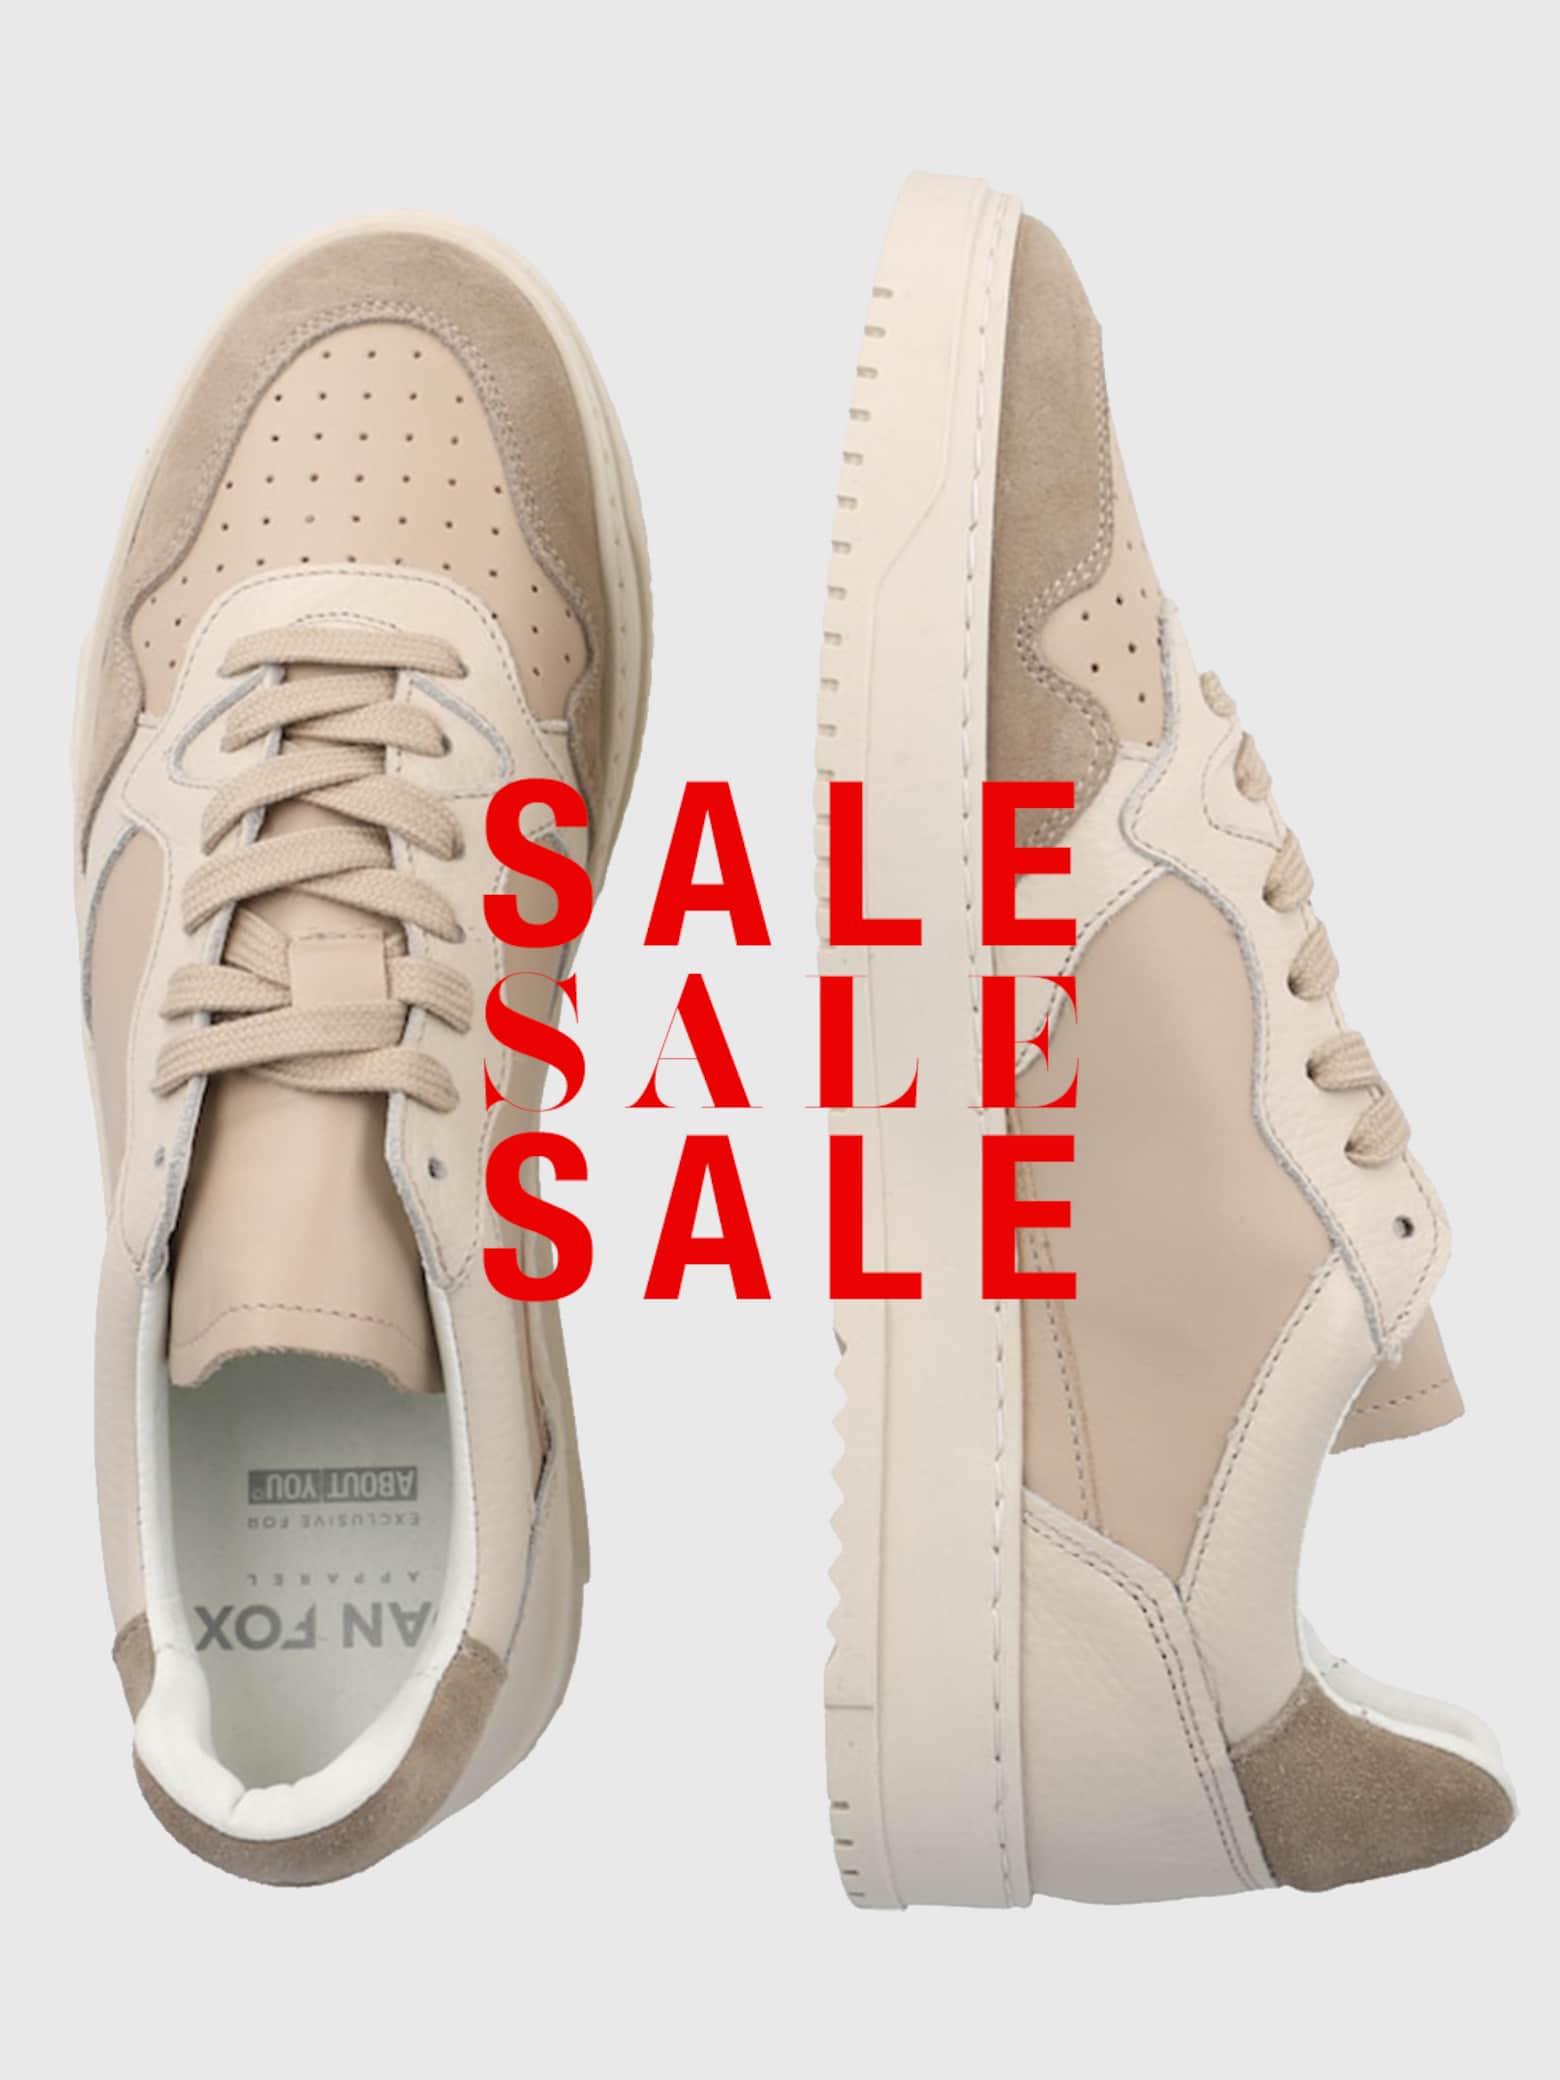 Save now! Sneakers